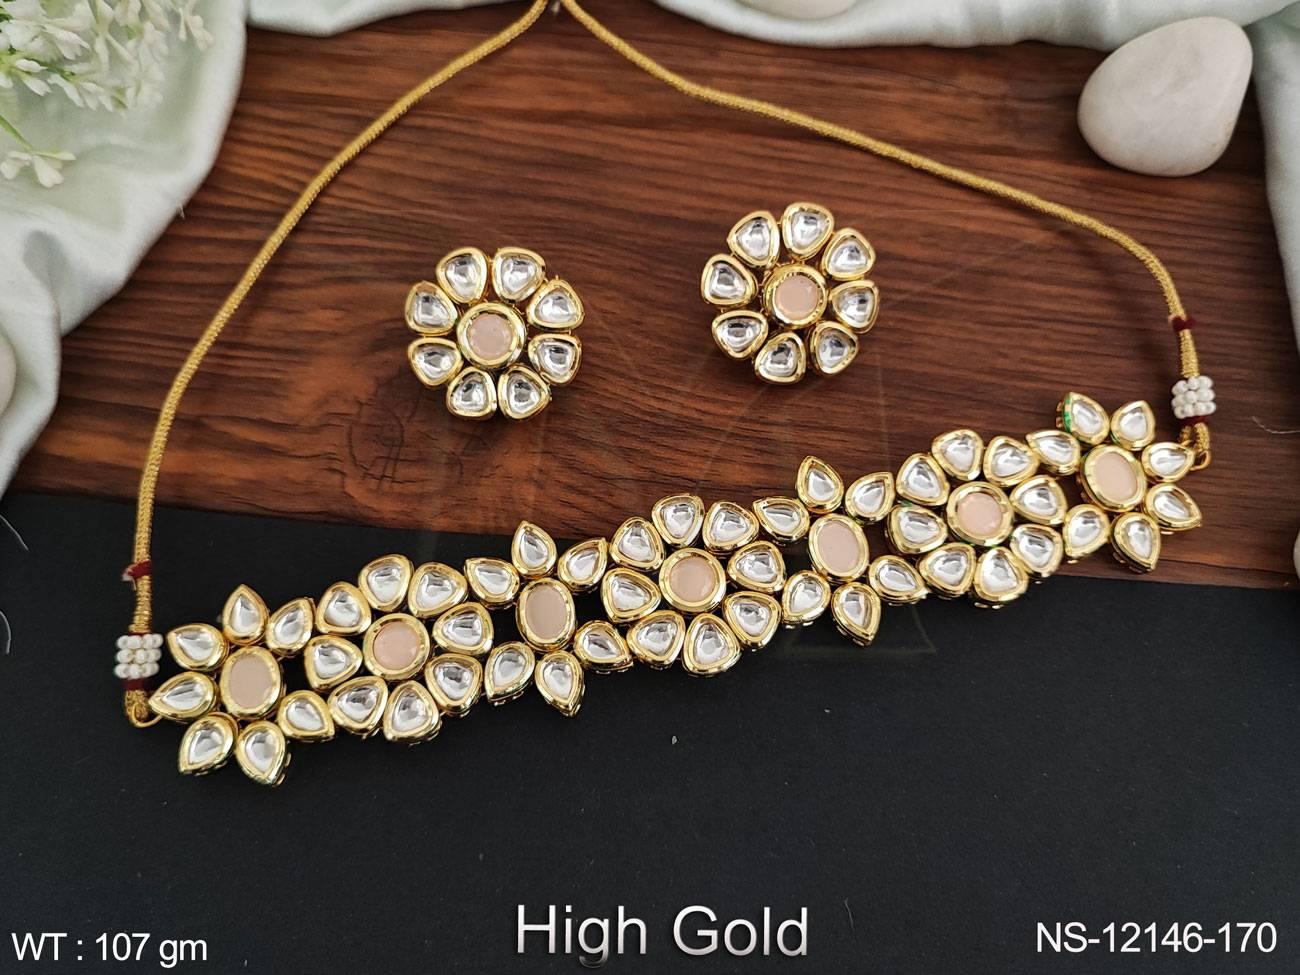 This choker style necklace set features intricate fancy designs and stunning Kundan stones to add a touch of elegance to any outfit.